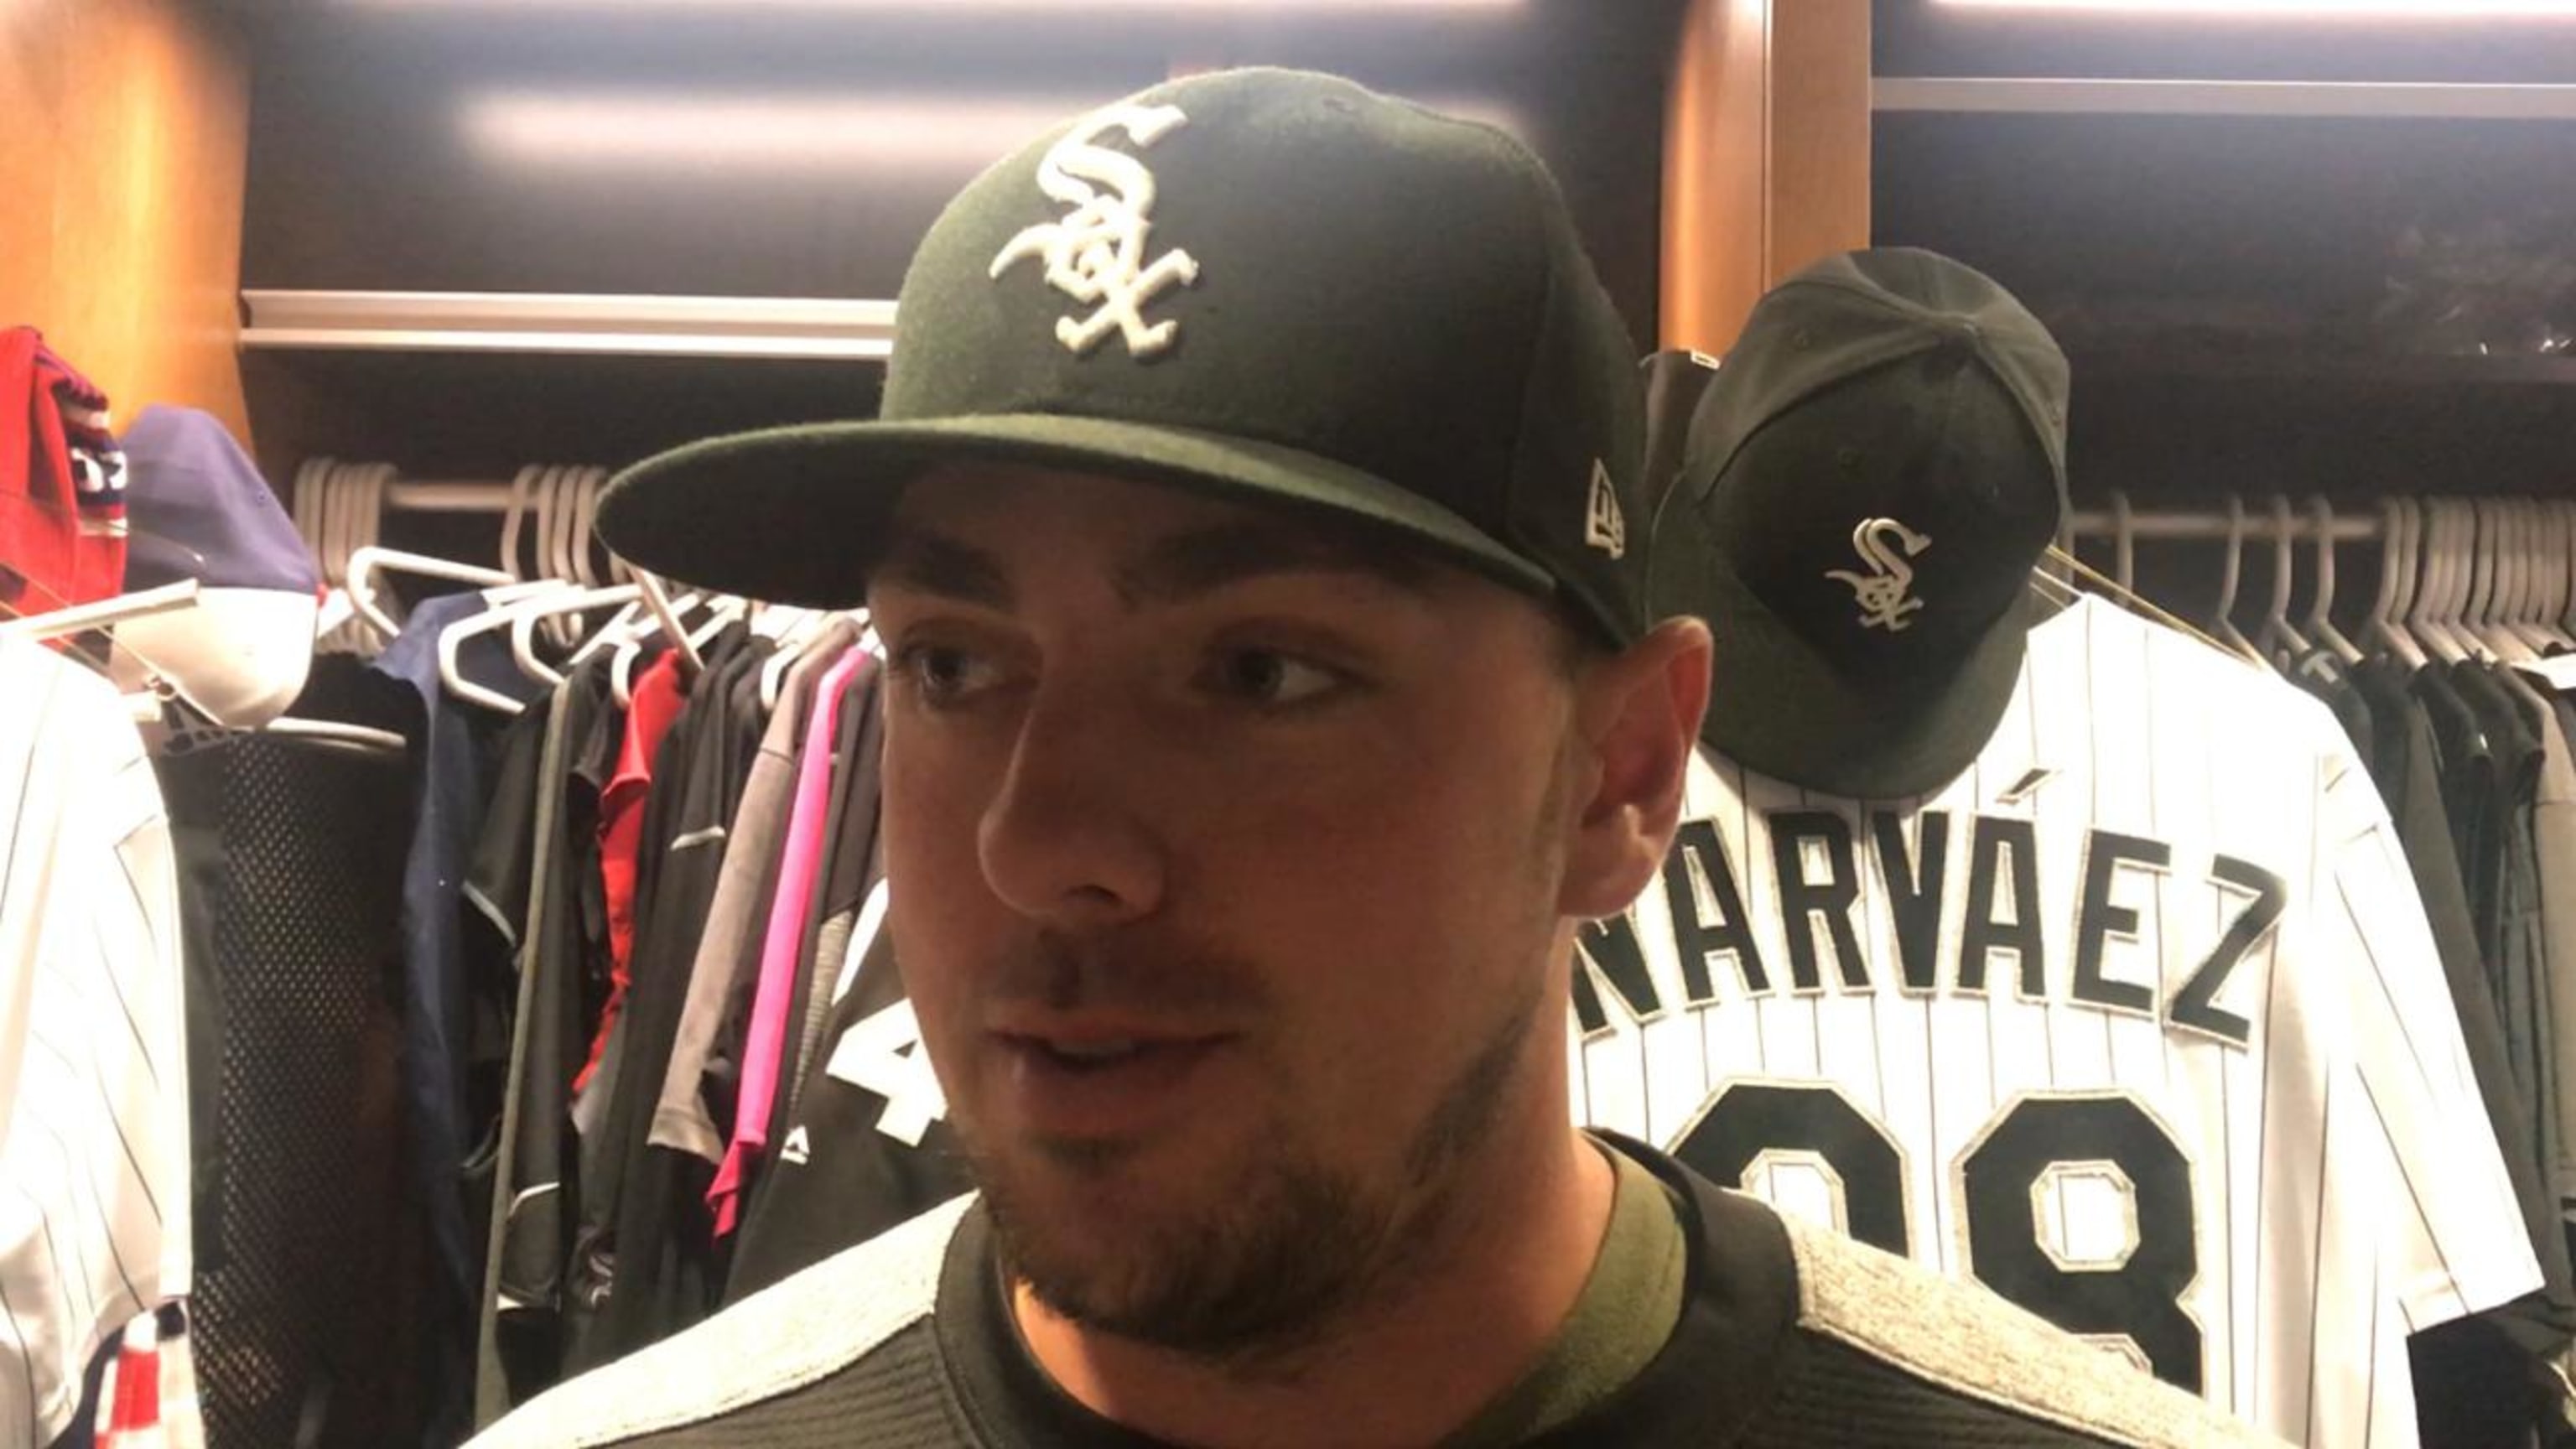 white sox players weekend jersey